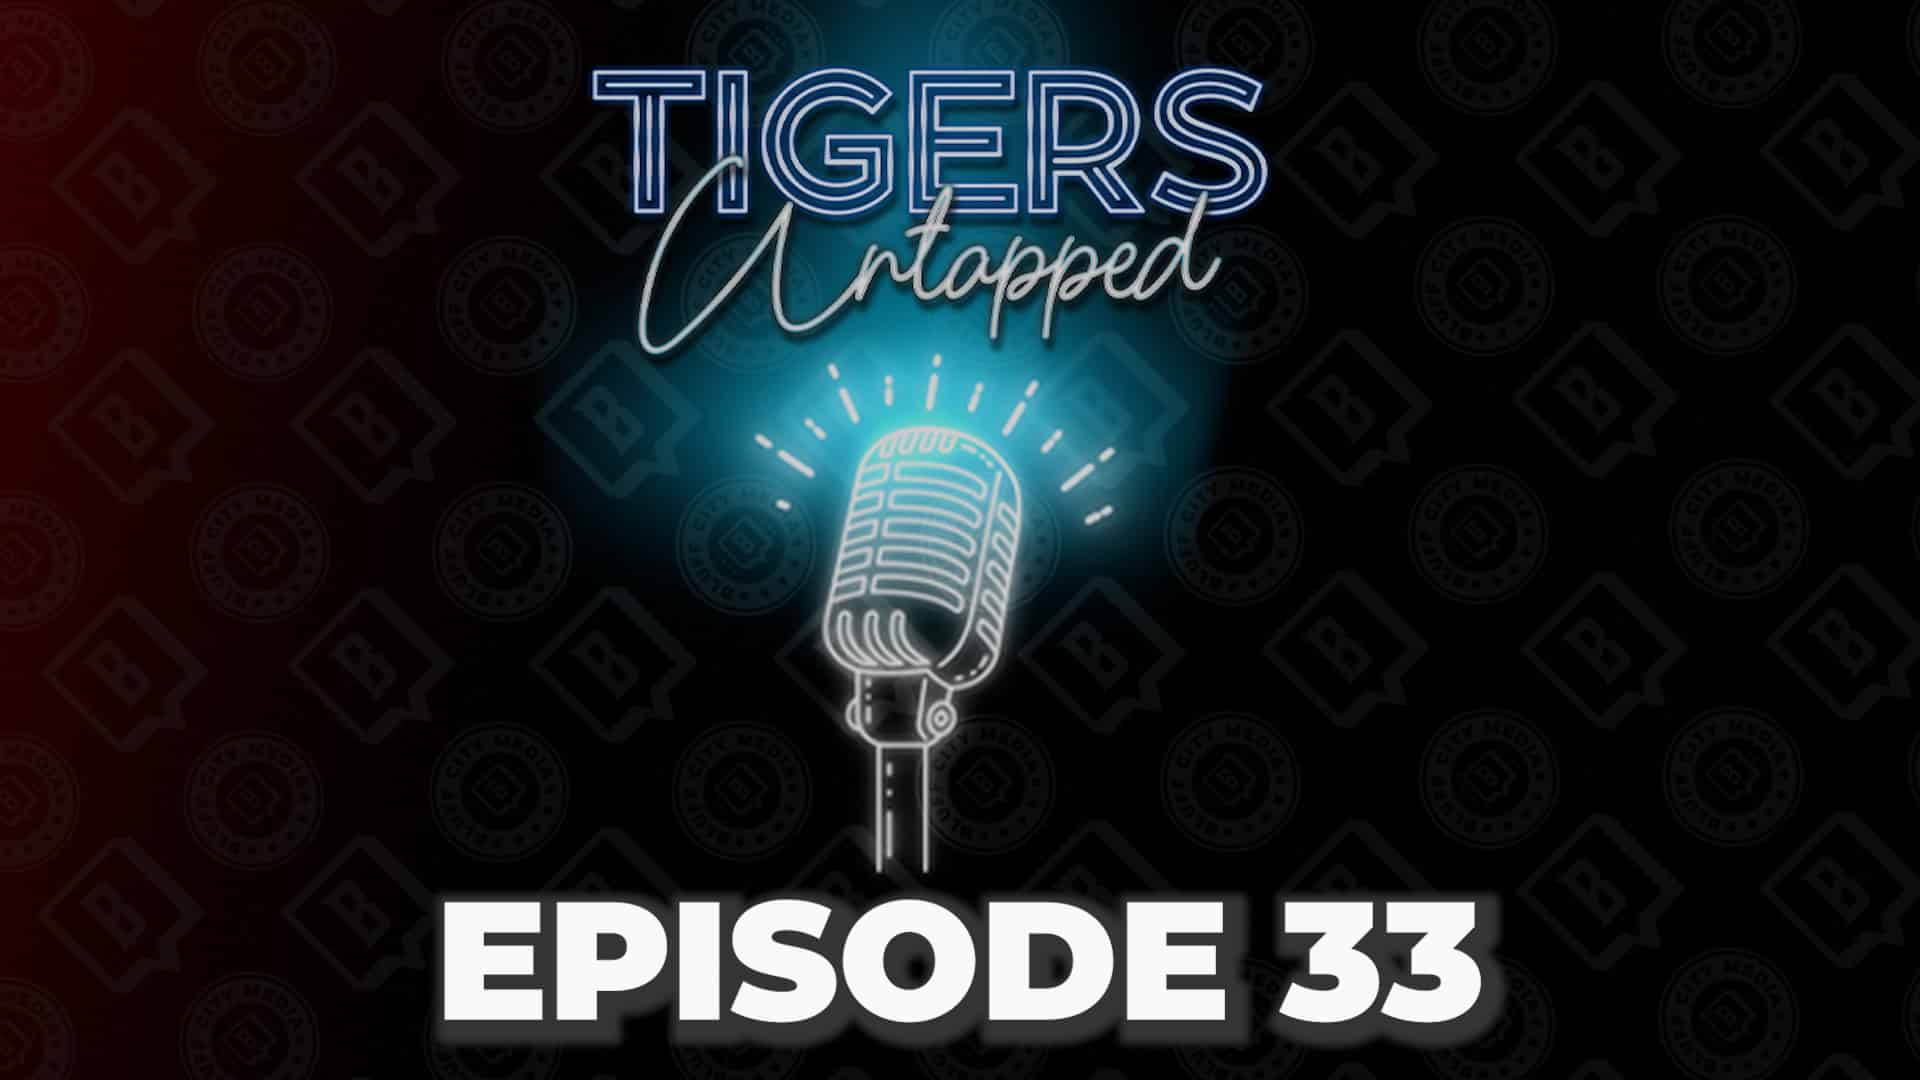 Featured image for “Tigers Untapped Ep 33: Jordan Brown’s Commitment, Ranking the Tigers’ Roster, Conference Realignment”